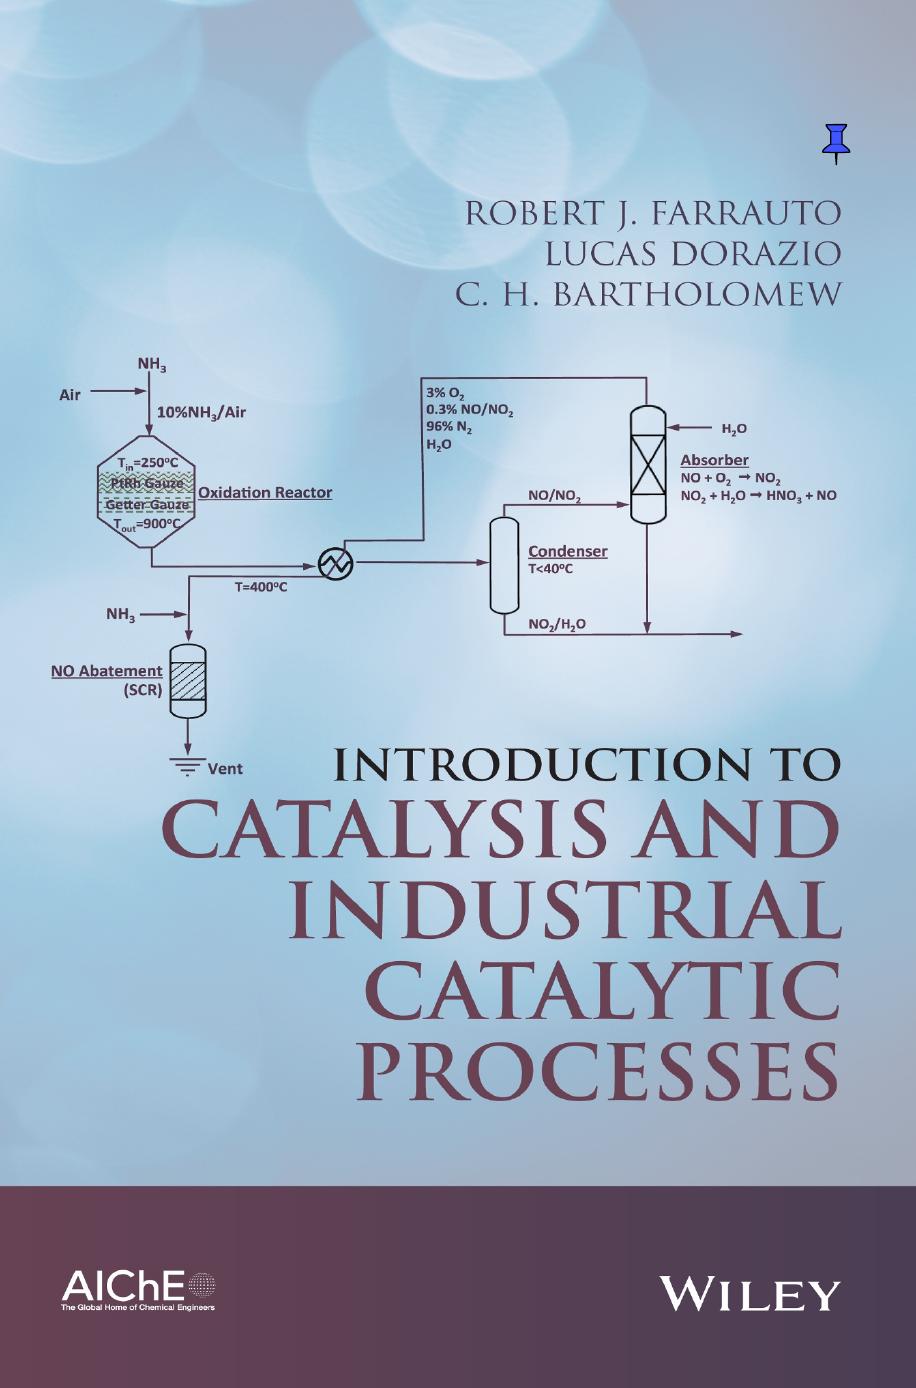 (eBook PDF)Introduction to Catalysis and Industrial Catalytic Processes by Robert J. Farrauto,Lucas Dorazio